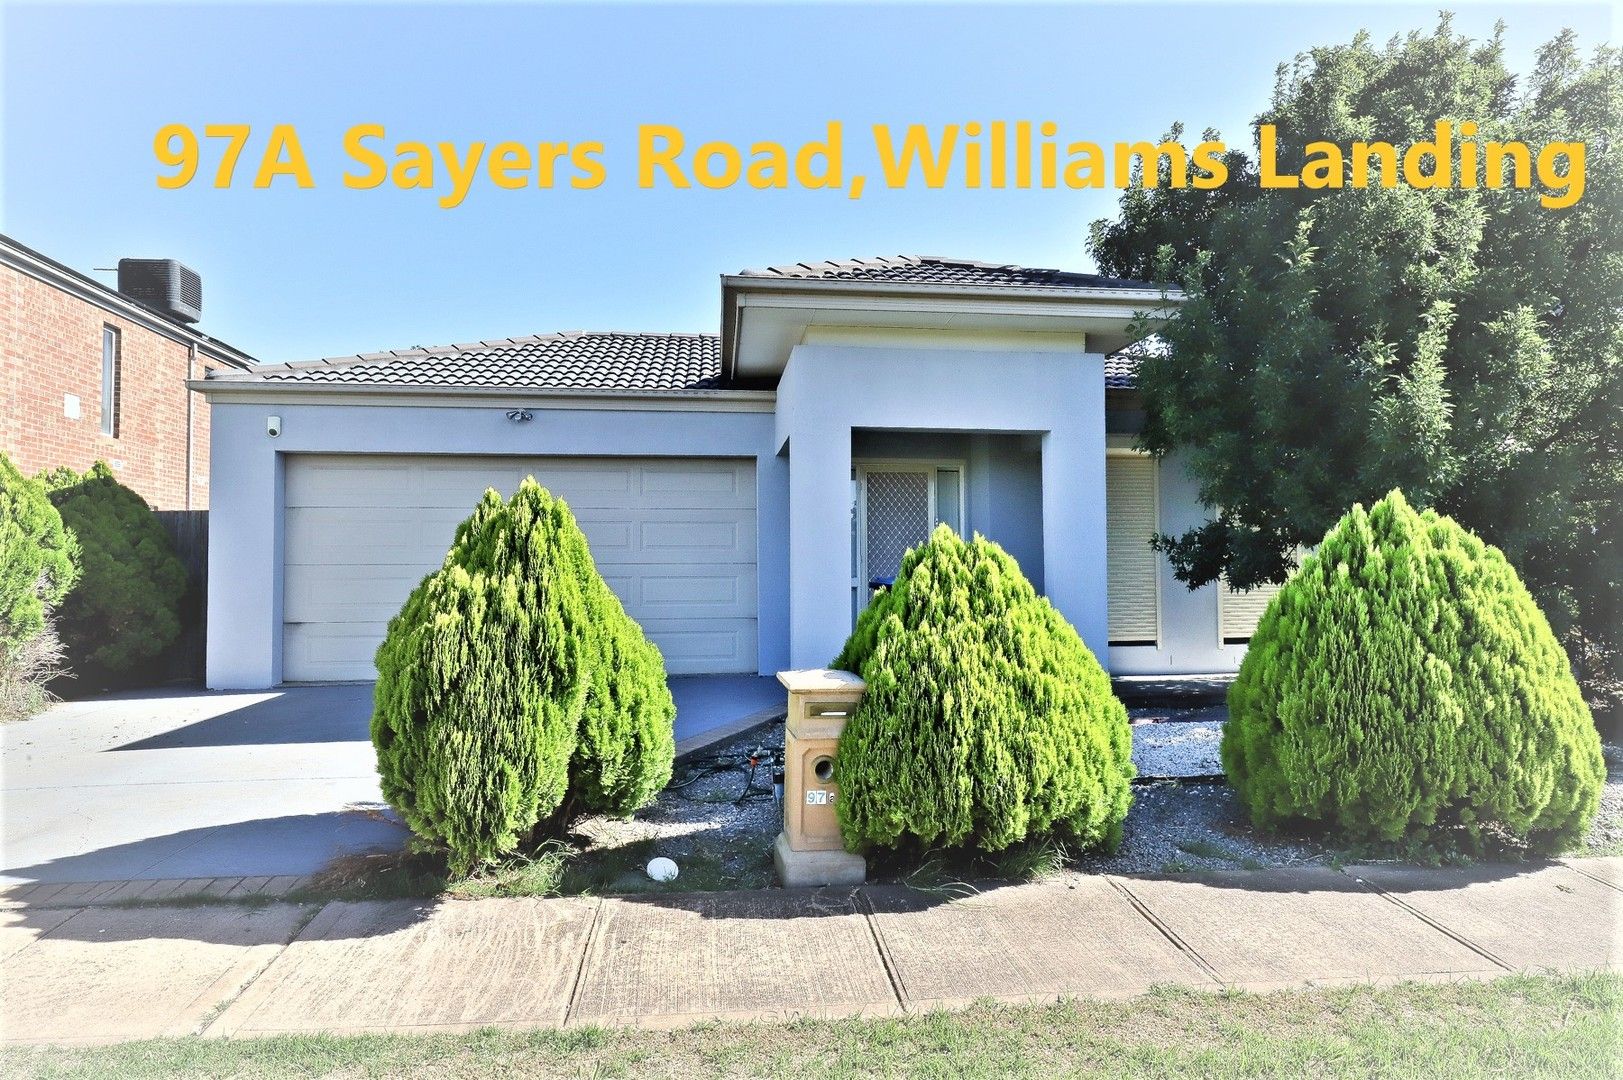 97A Sayers Road, Williams Landing VIC 3027, Image 0